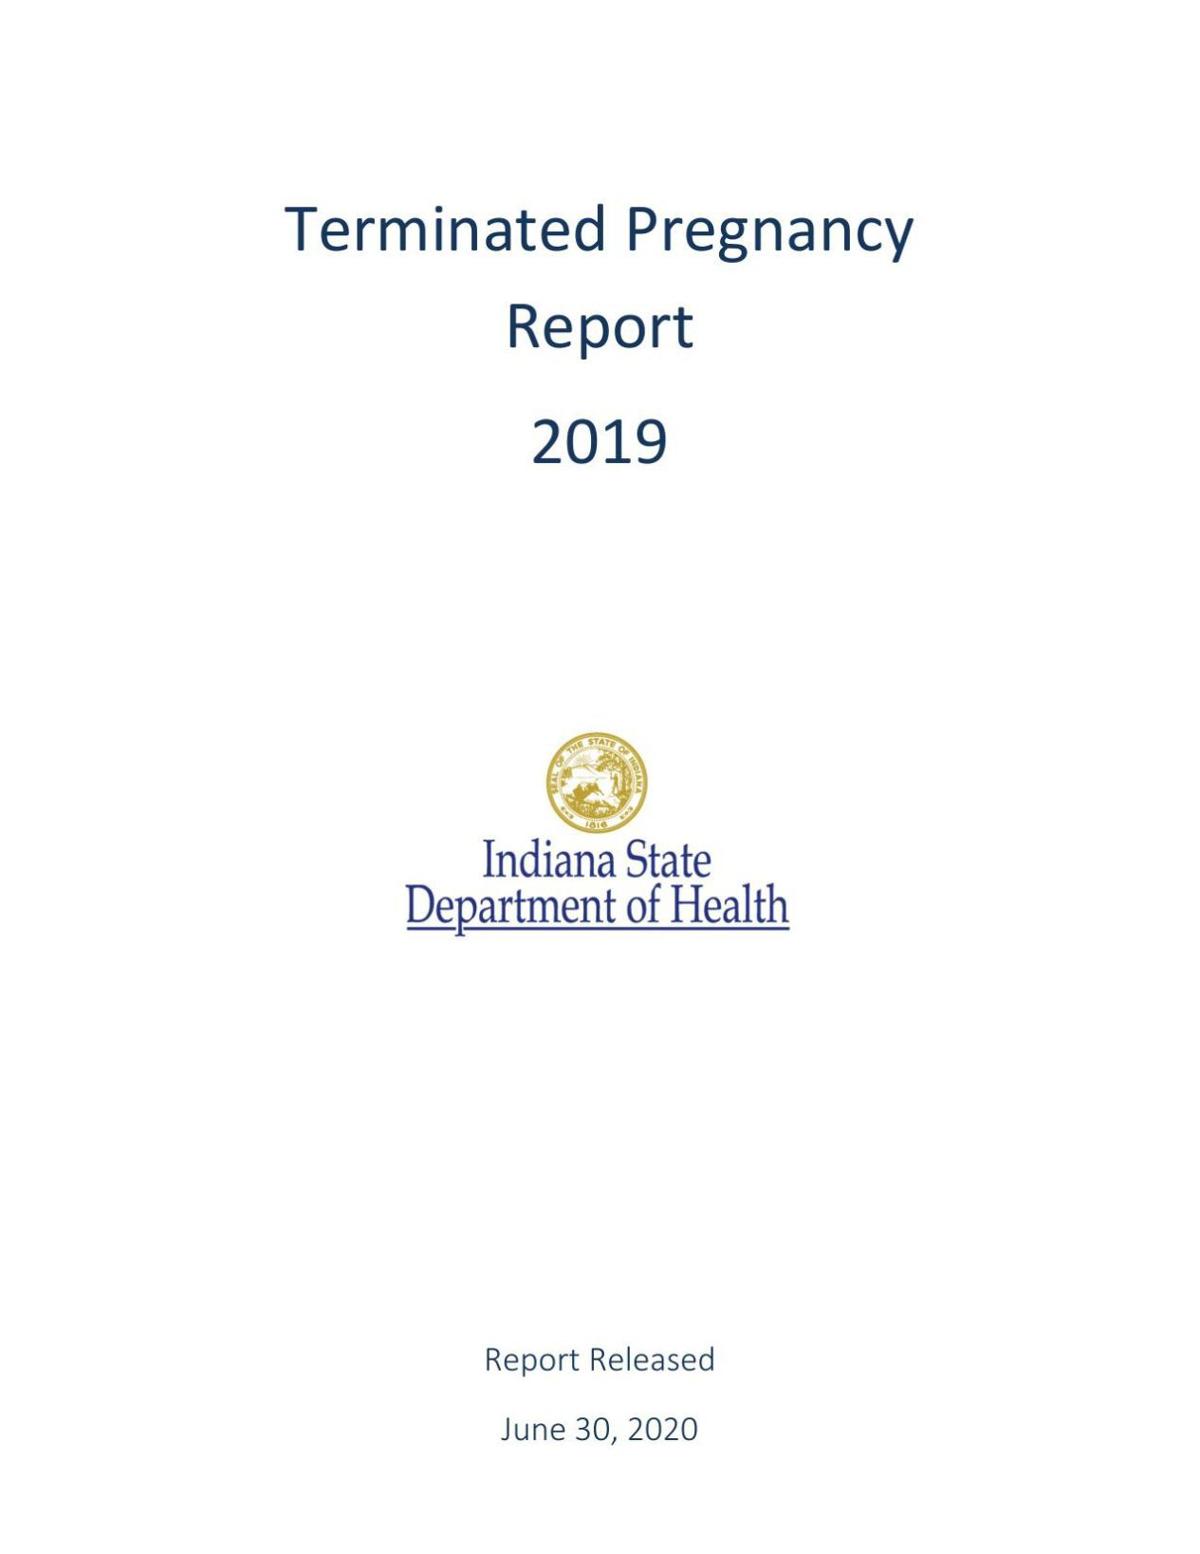 2019 Indiana Terminated Pregnancy Report